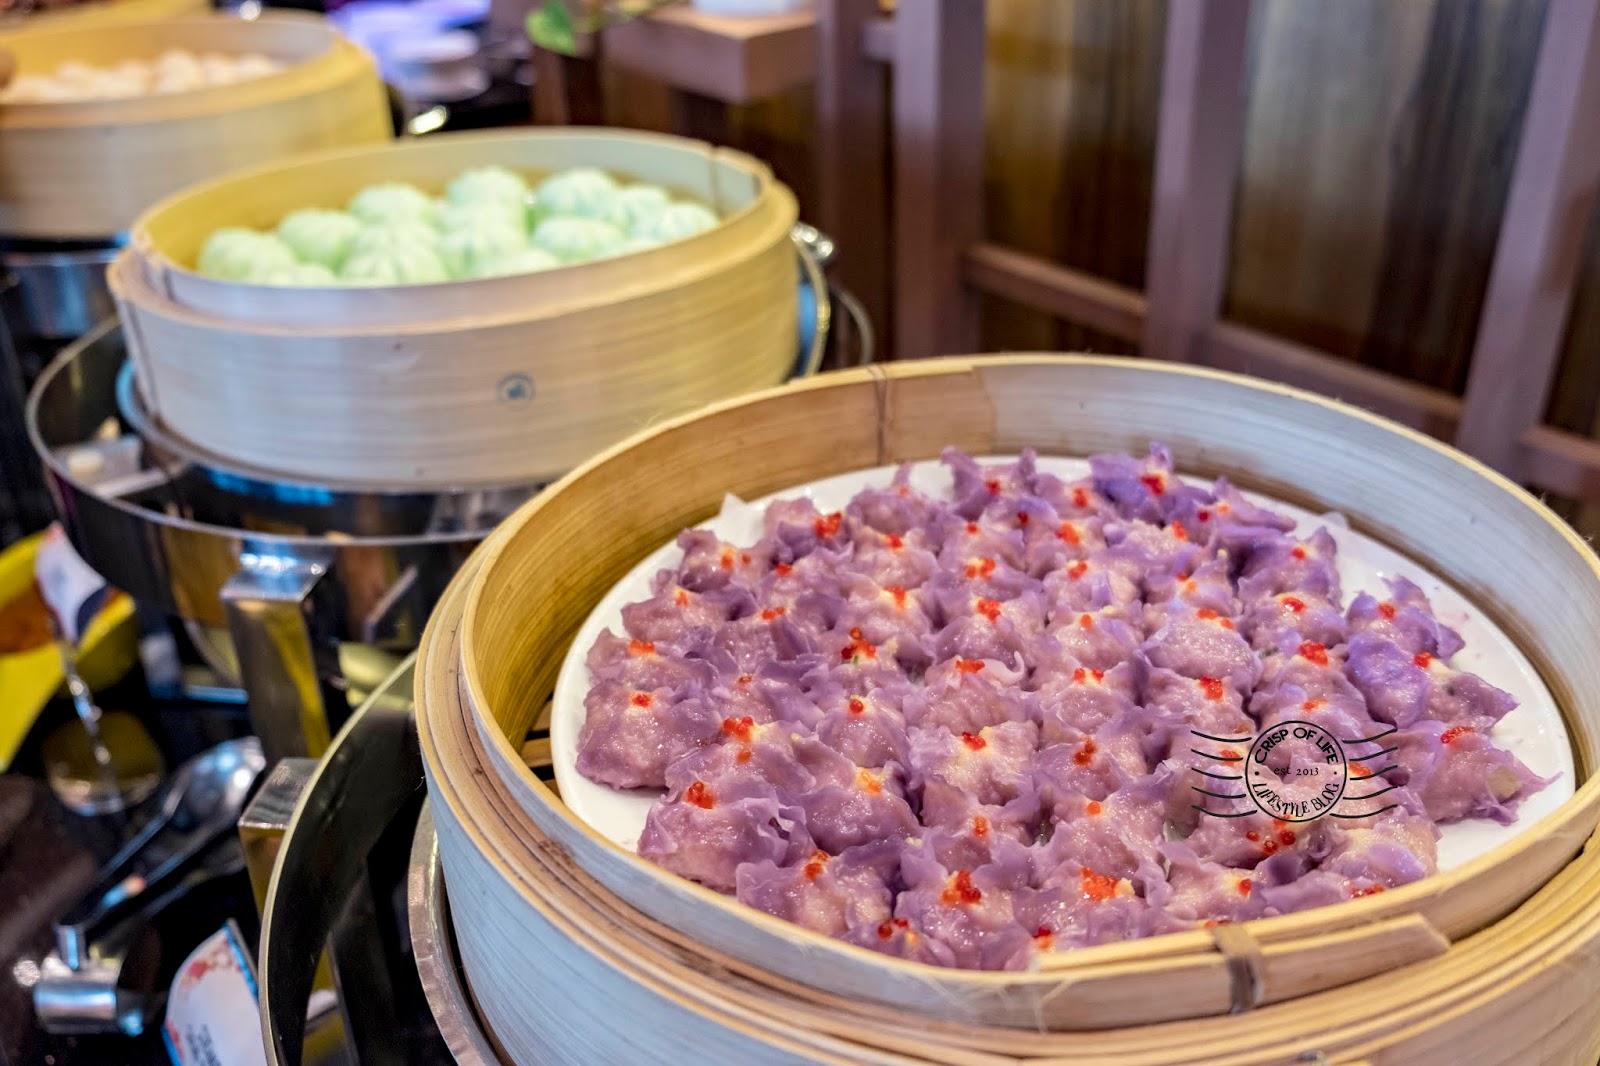 Chinese New Year Festive Buffet with Assortment of Good Food @ The Light Hotel Penang